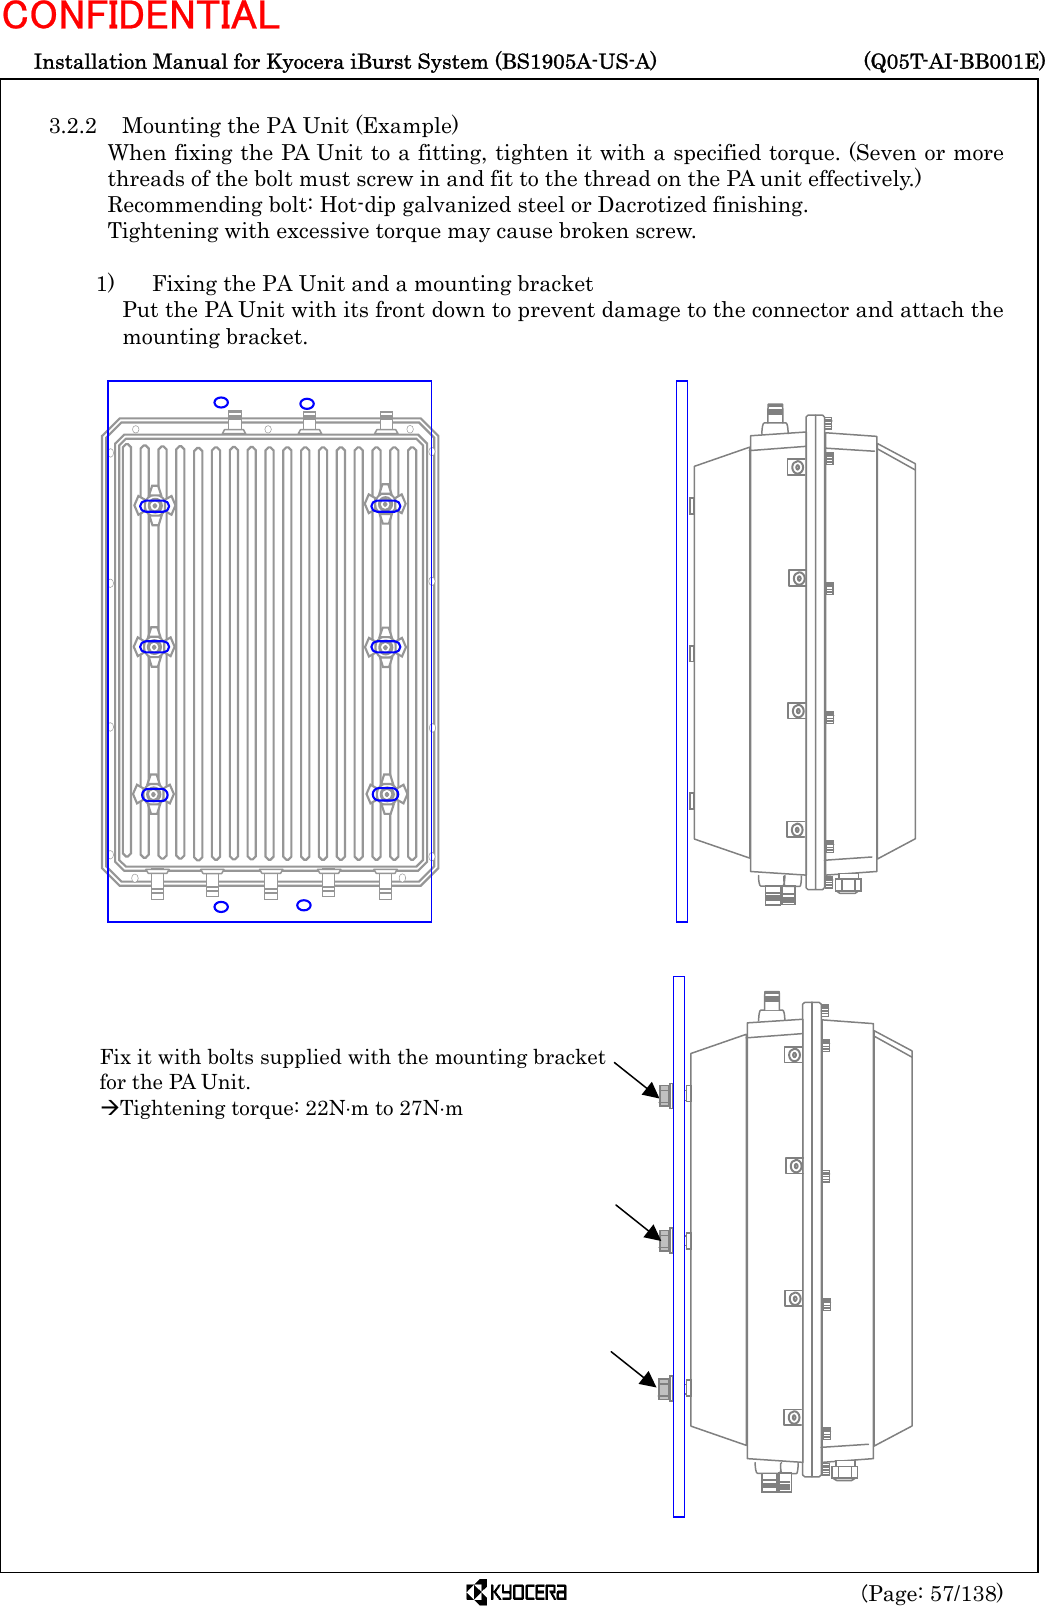  Installation Manual for Kyocera iBurst System (BS1905A-US-A)     (Q05T-AI-BB001E) (Page: 57/138) CONFIDENTIAL  3.2.2  Mounting the PA Unit (Example) When fixing the PA Unit to a fitting, tighten it with a specified torque. (Seven or more threads of the bolt must screw in and fit to the thread on the PA unit effectively.) Recommending bolt: Hot-dip galvanized steel or Dacrotized finishing. Tightening with excessive torque may cause broken screw.  1)    Fixing the PA Unit and a mounting bracket   Put the PA Unit with its front down to prevent damage to the connector and attach the mounting bracket.                                         Fix it with bolts supplied with the mounting bracketfor the PA Unit. ÆTightening torque: 22N⋅m to 27N⋅m 